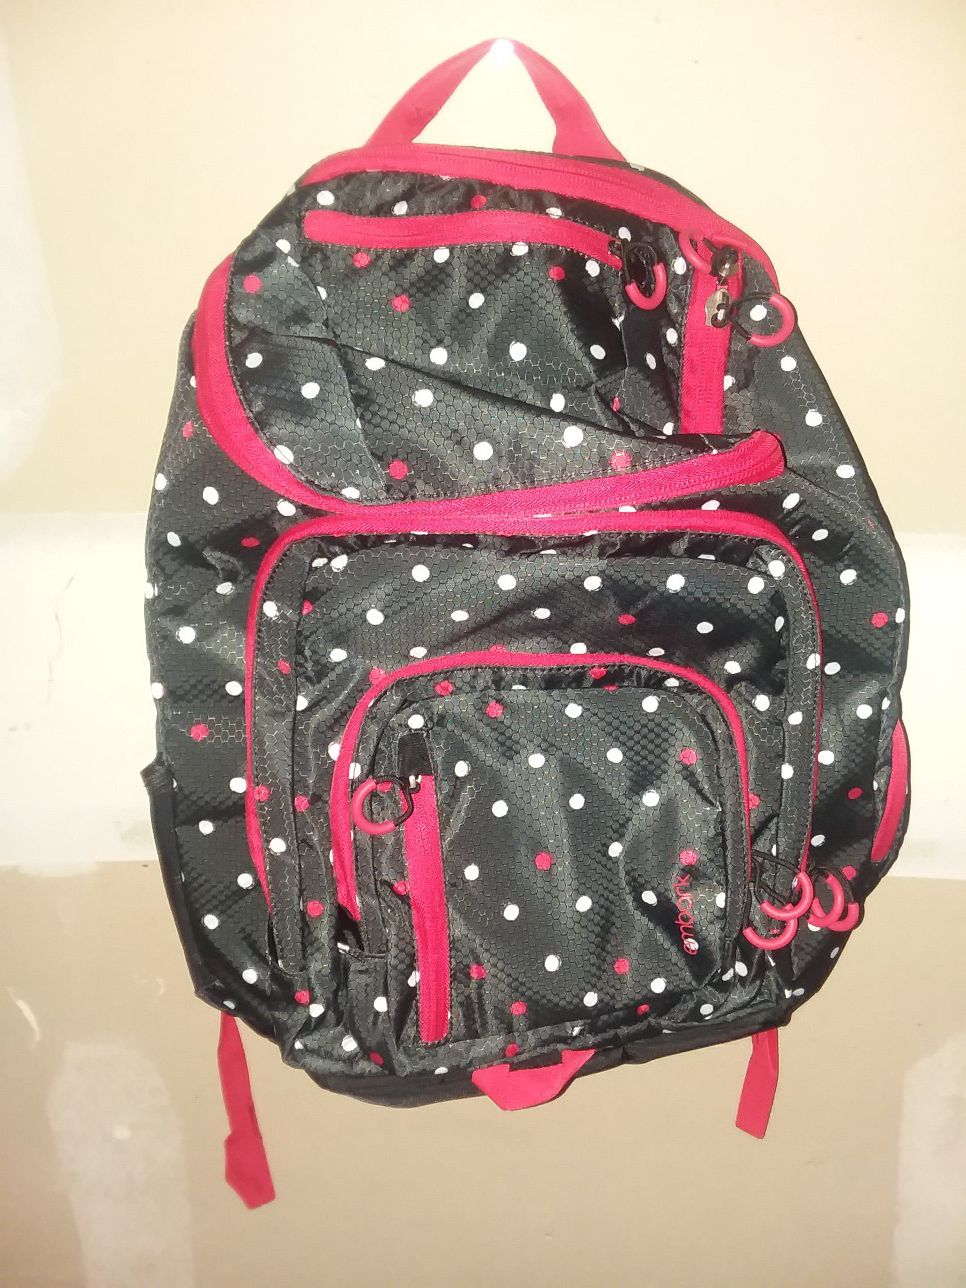 MAKE AN OFFER - embark Jartop Elite Black With Red/White Polka Dots Laptop Backpack - New Without Tags